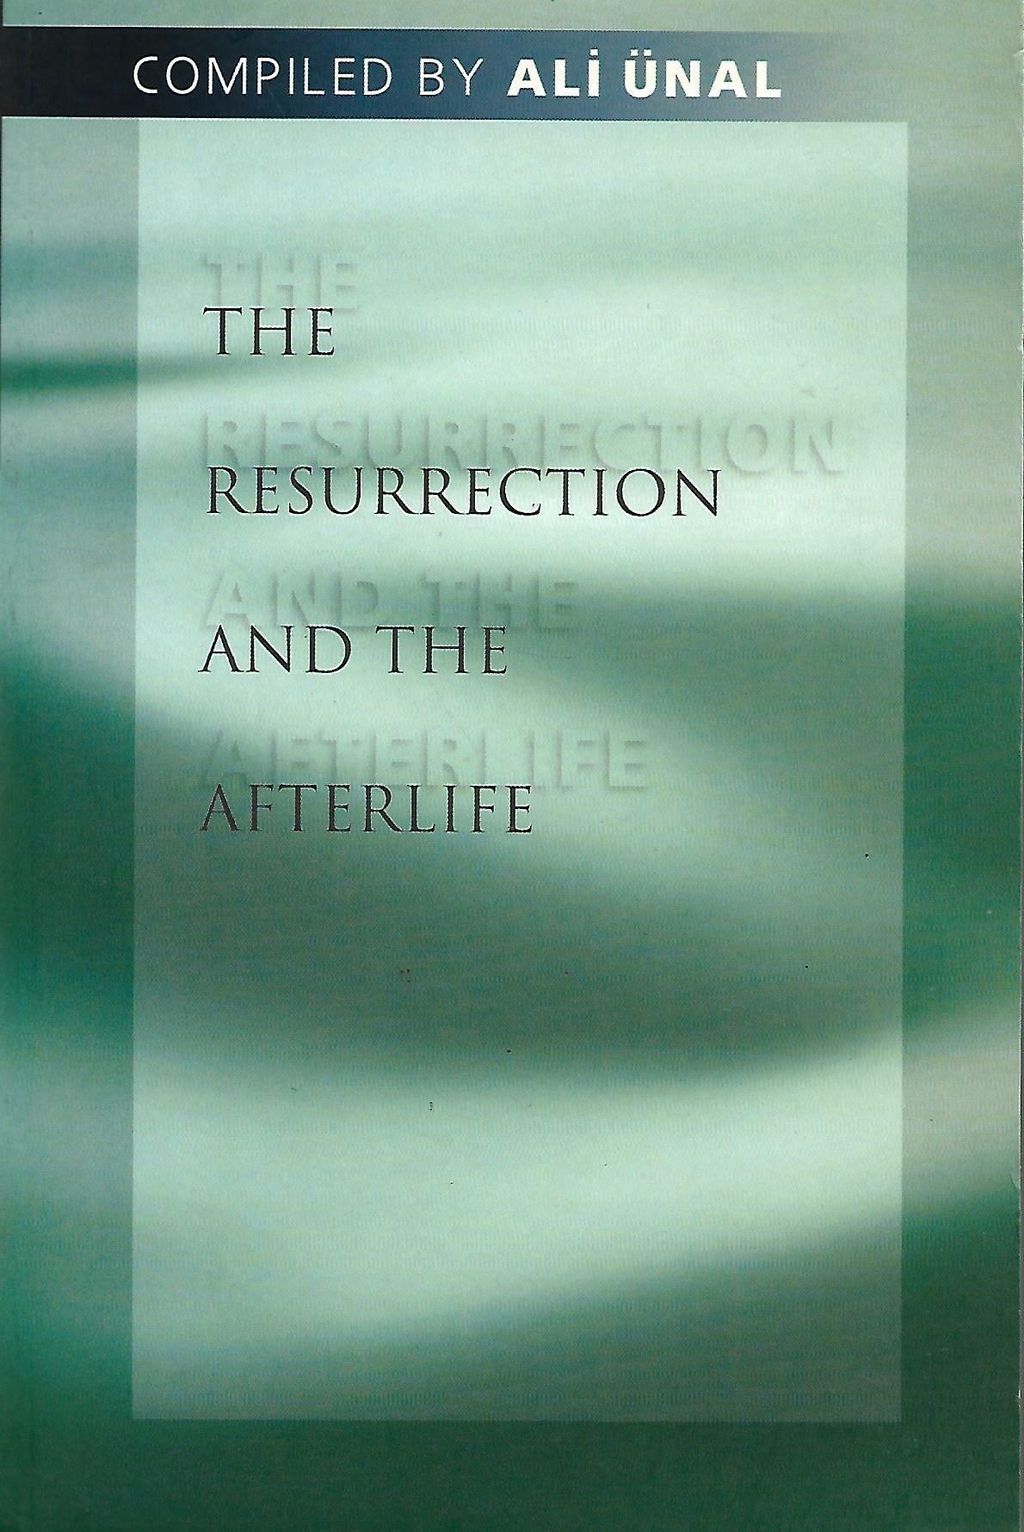 the resurrection and afterlife_0001.jpg